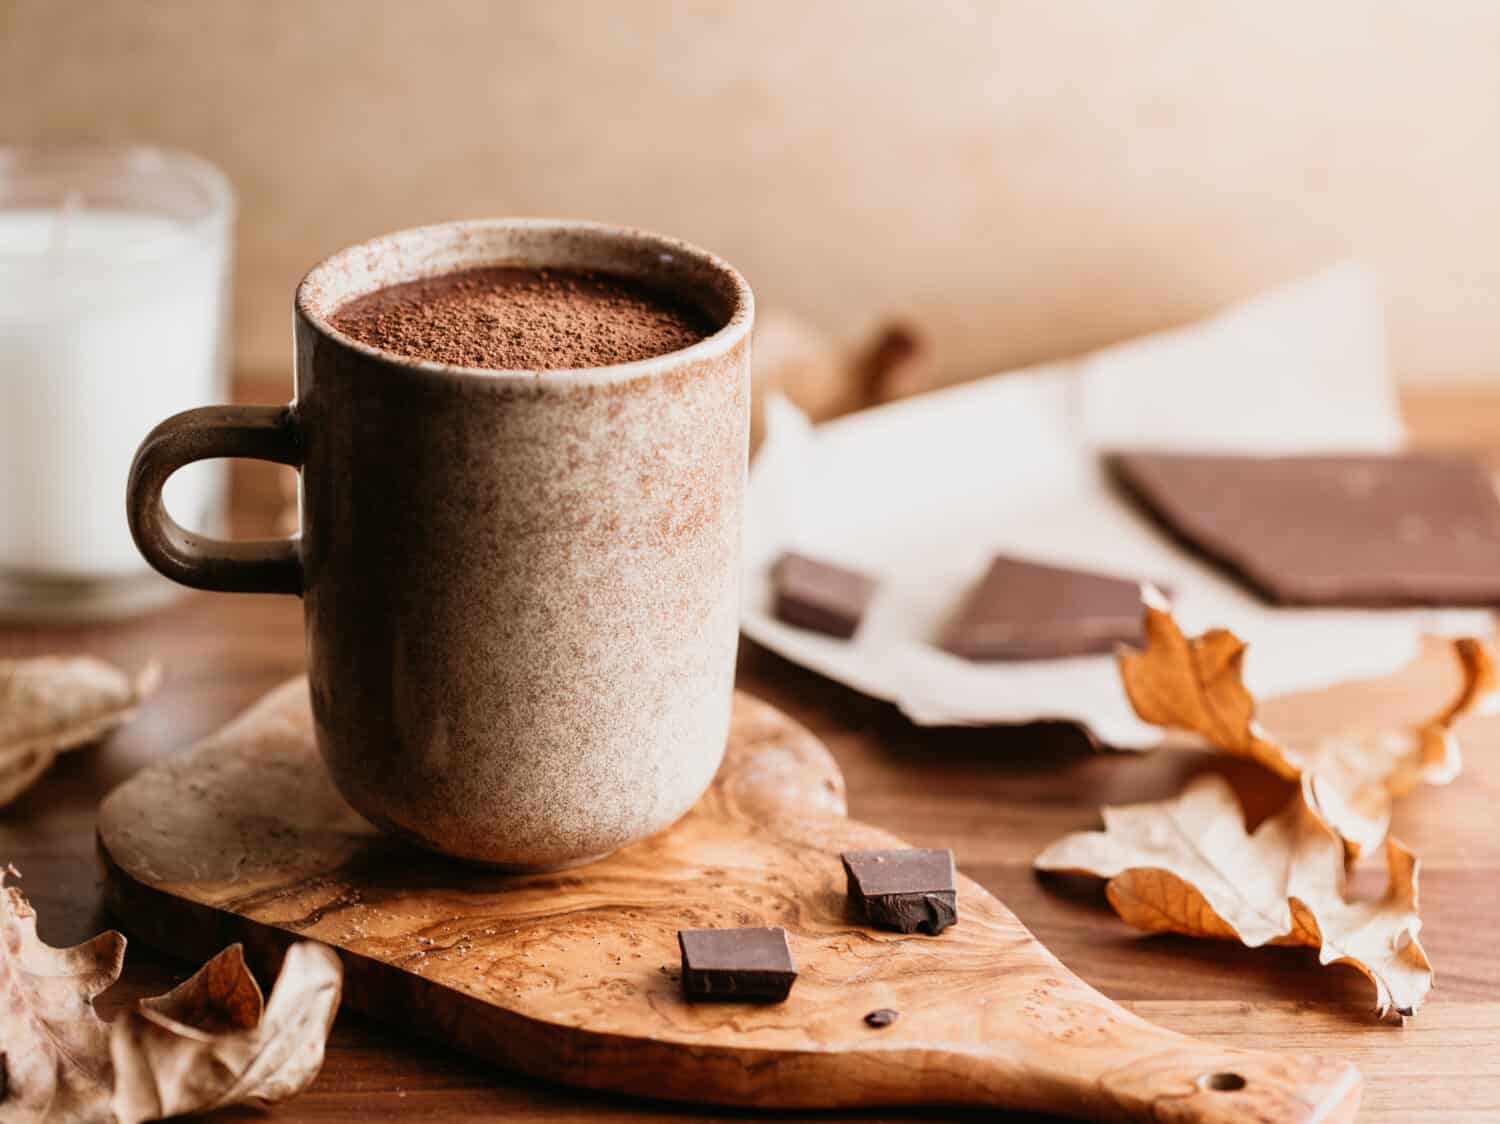 Close-up of hot chocolate in a ceramic mug on the table. Autumn or winter cozy still life.